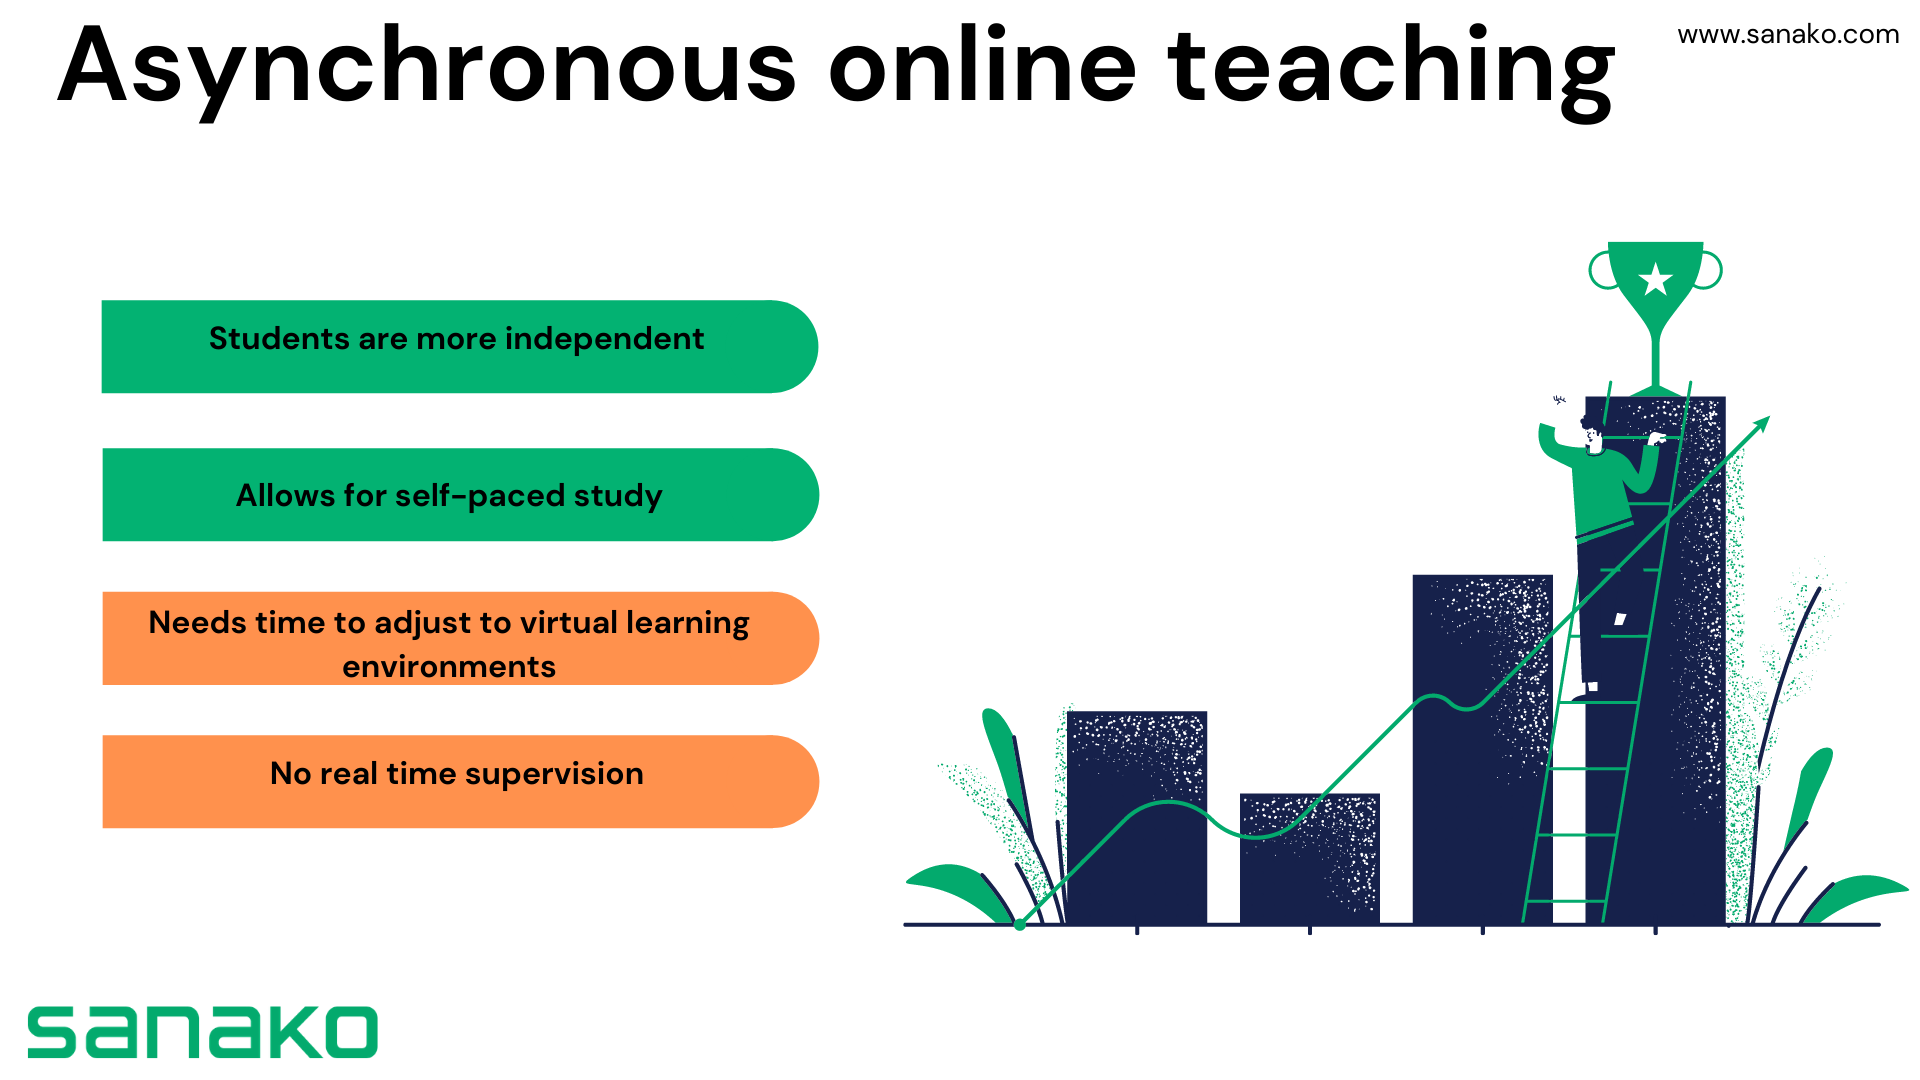 What does asynchronous online learning provides?